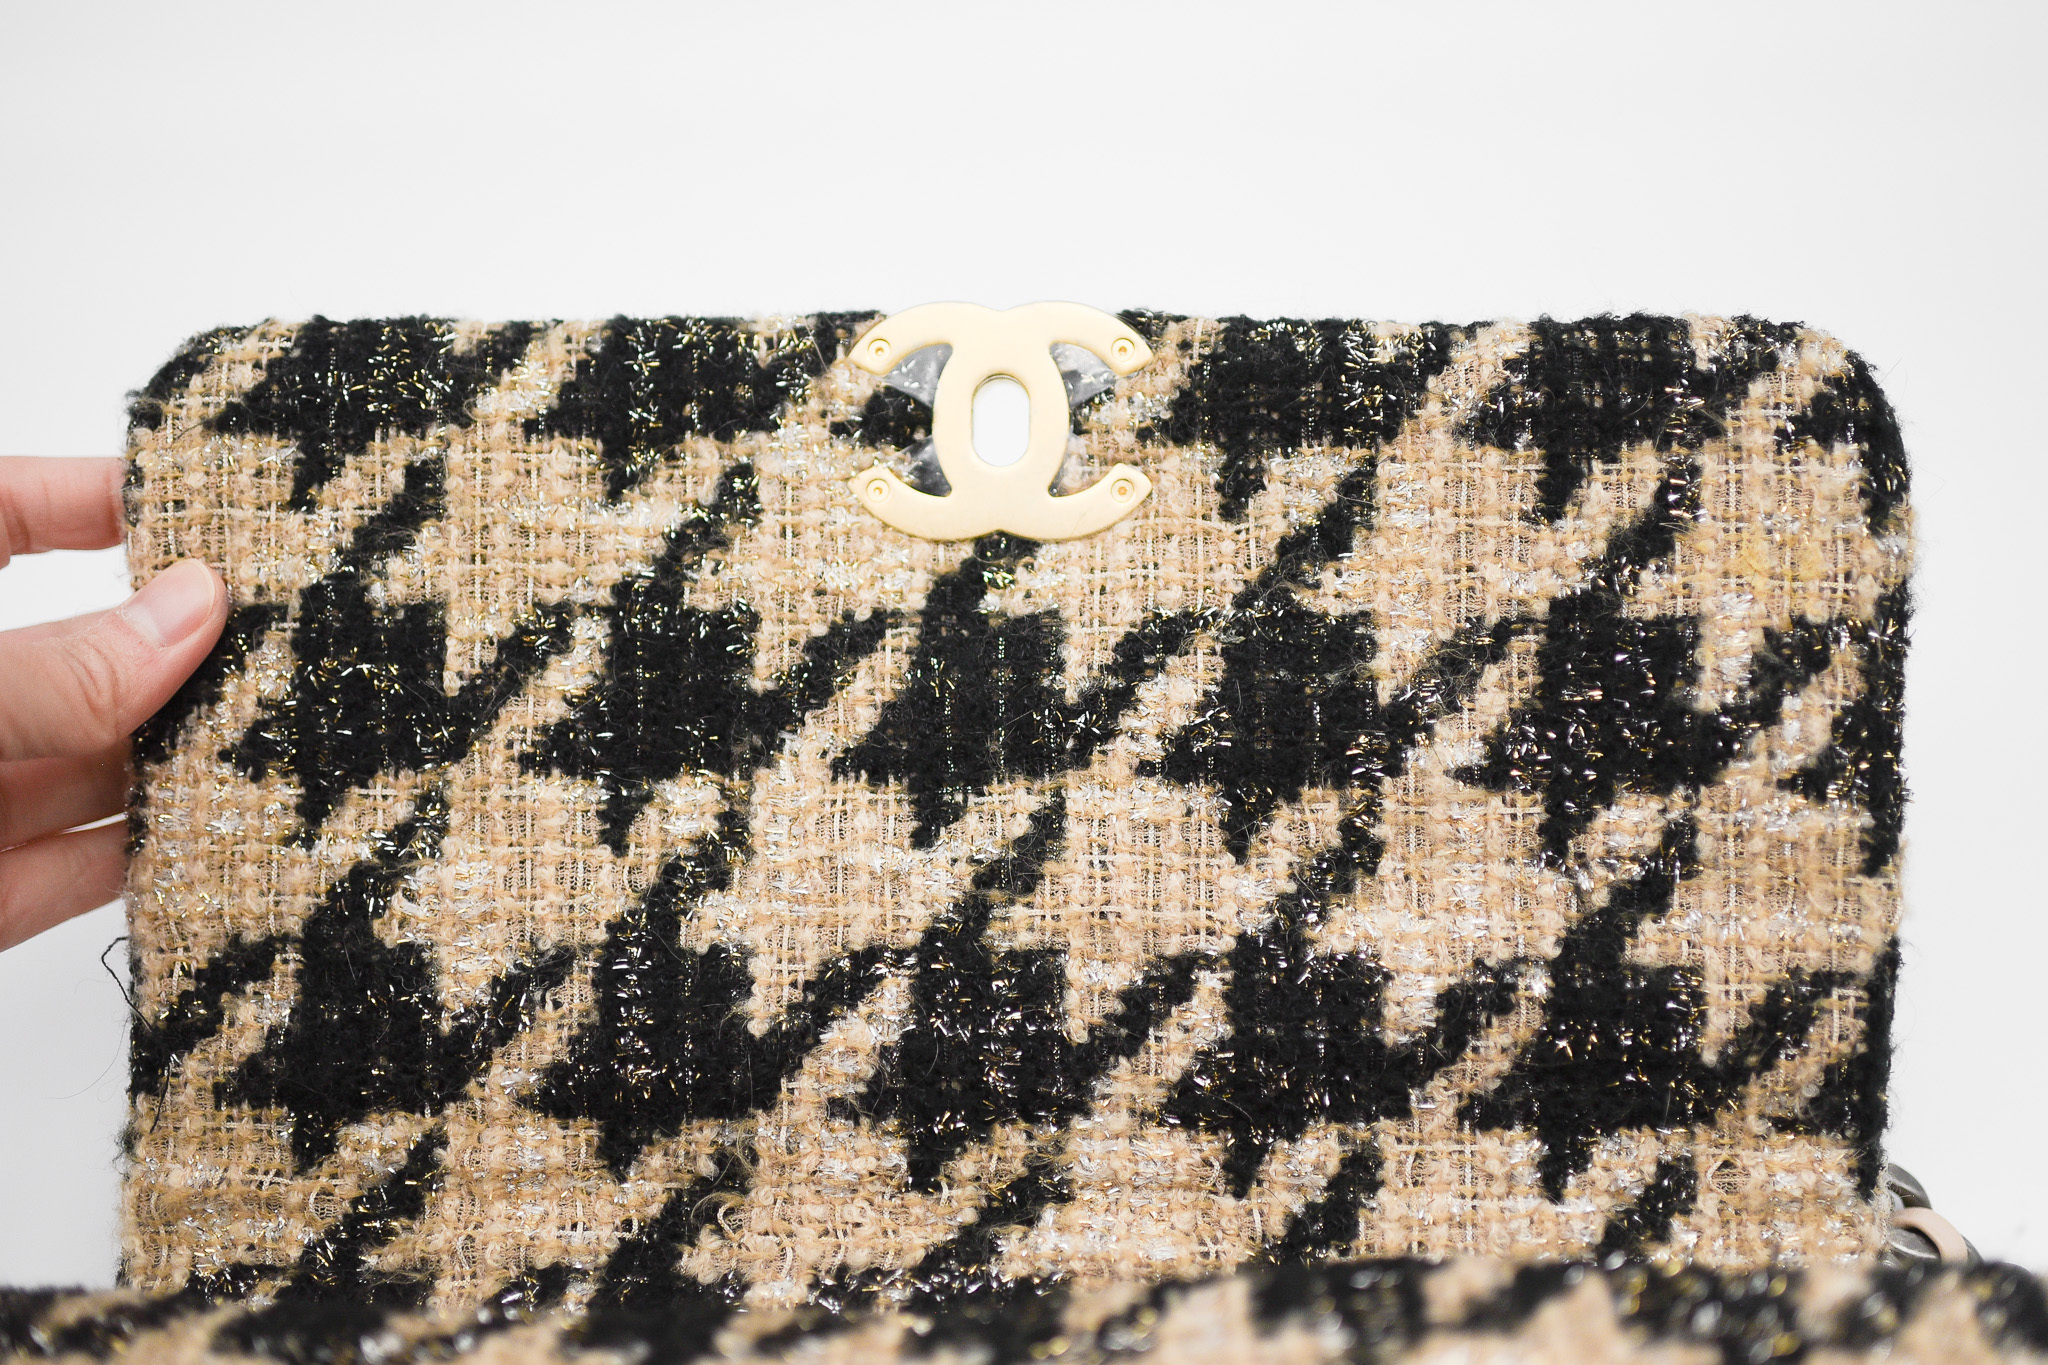 Chanel 19 Large, Beige and Black Houndstooth Tweed, Preowned in